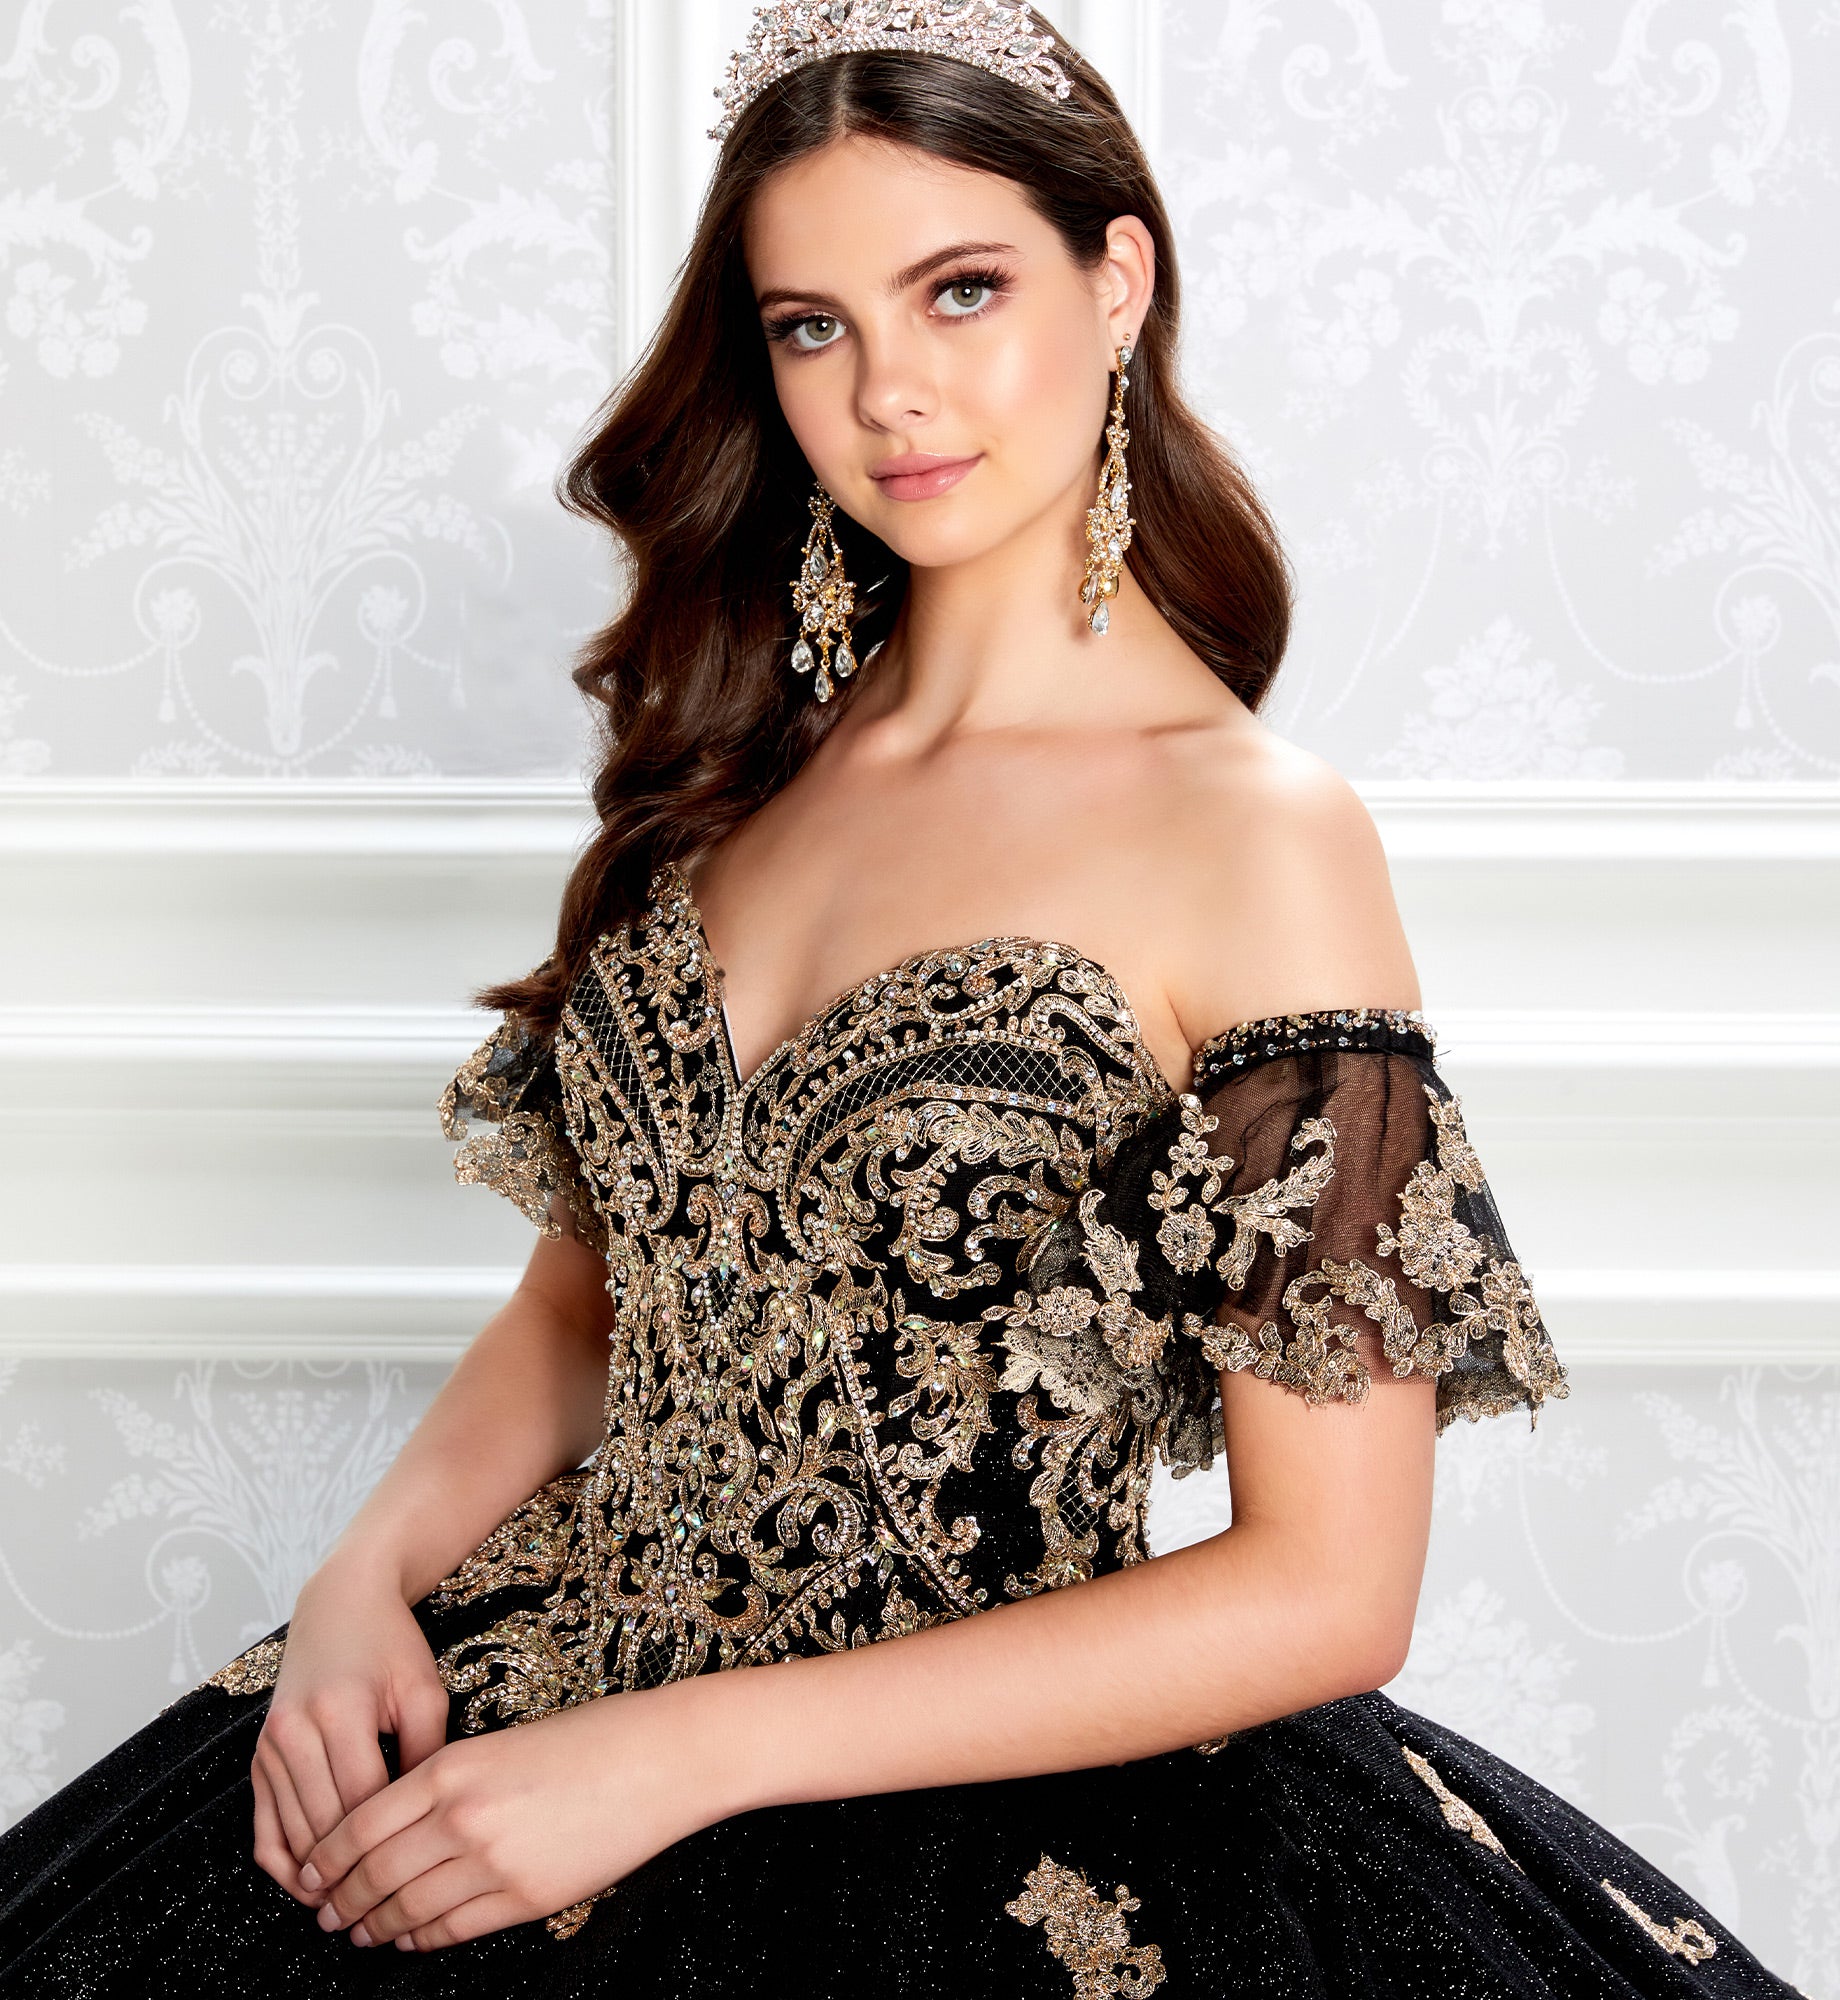 Eye-catching strapless quinceanera dress with gold embroidery